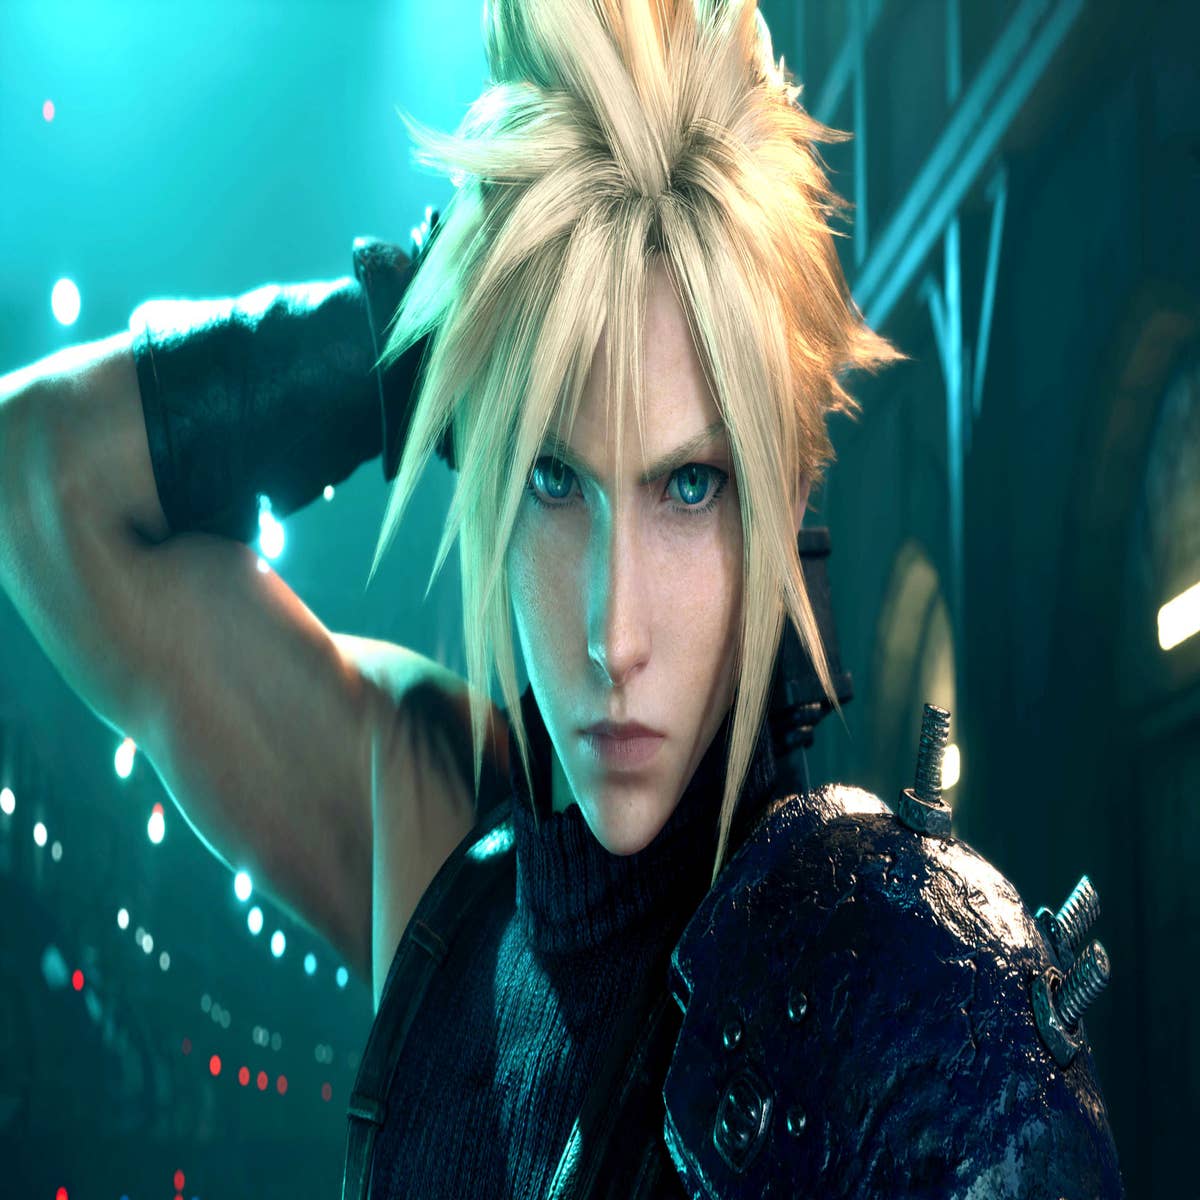 The Producer Of Final Fantasy VII Remake Would Like To See More